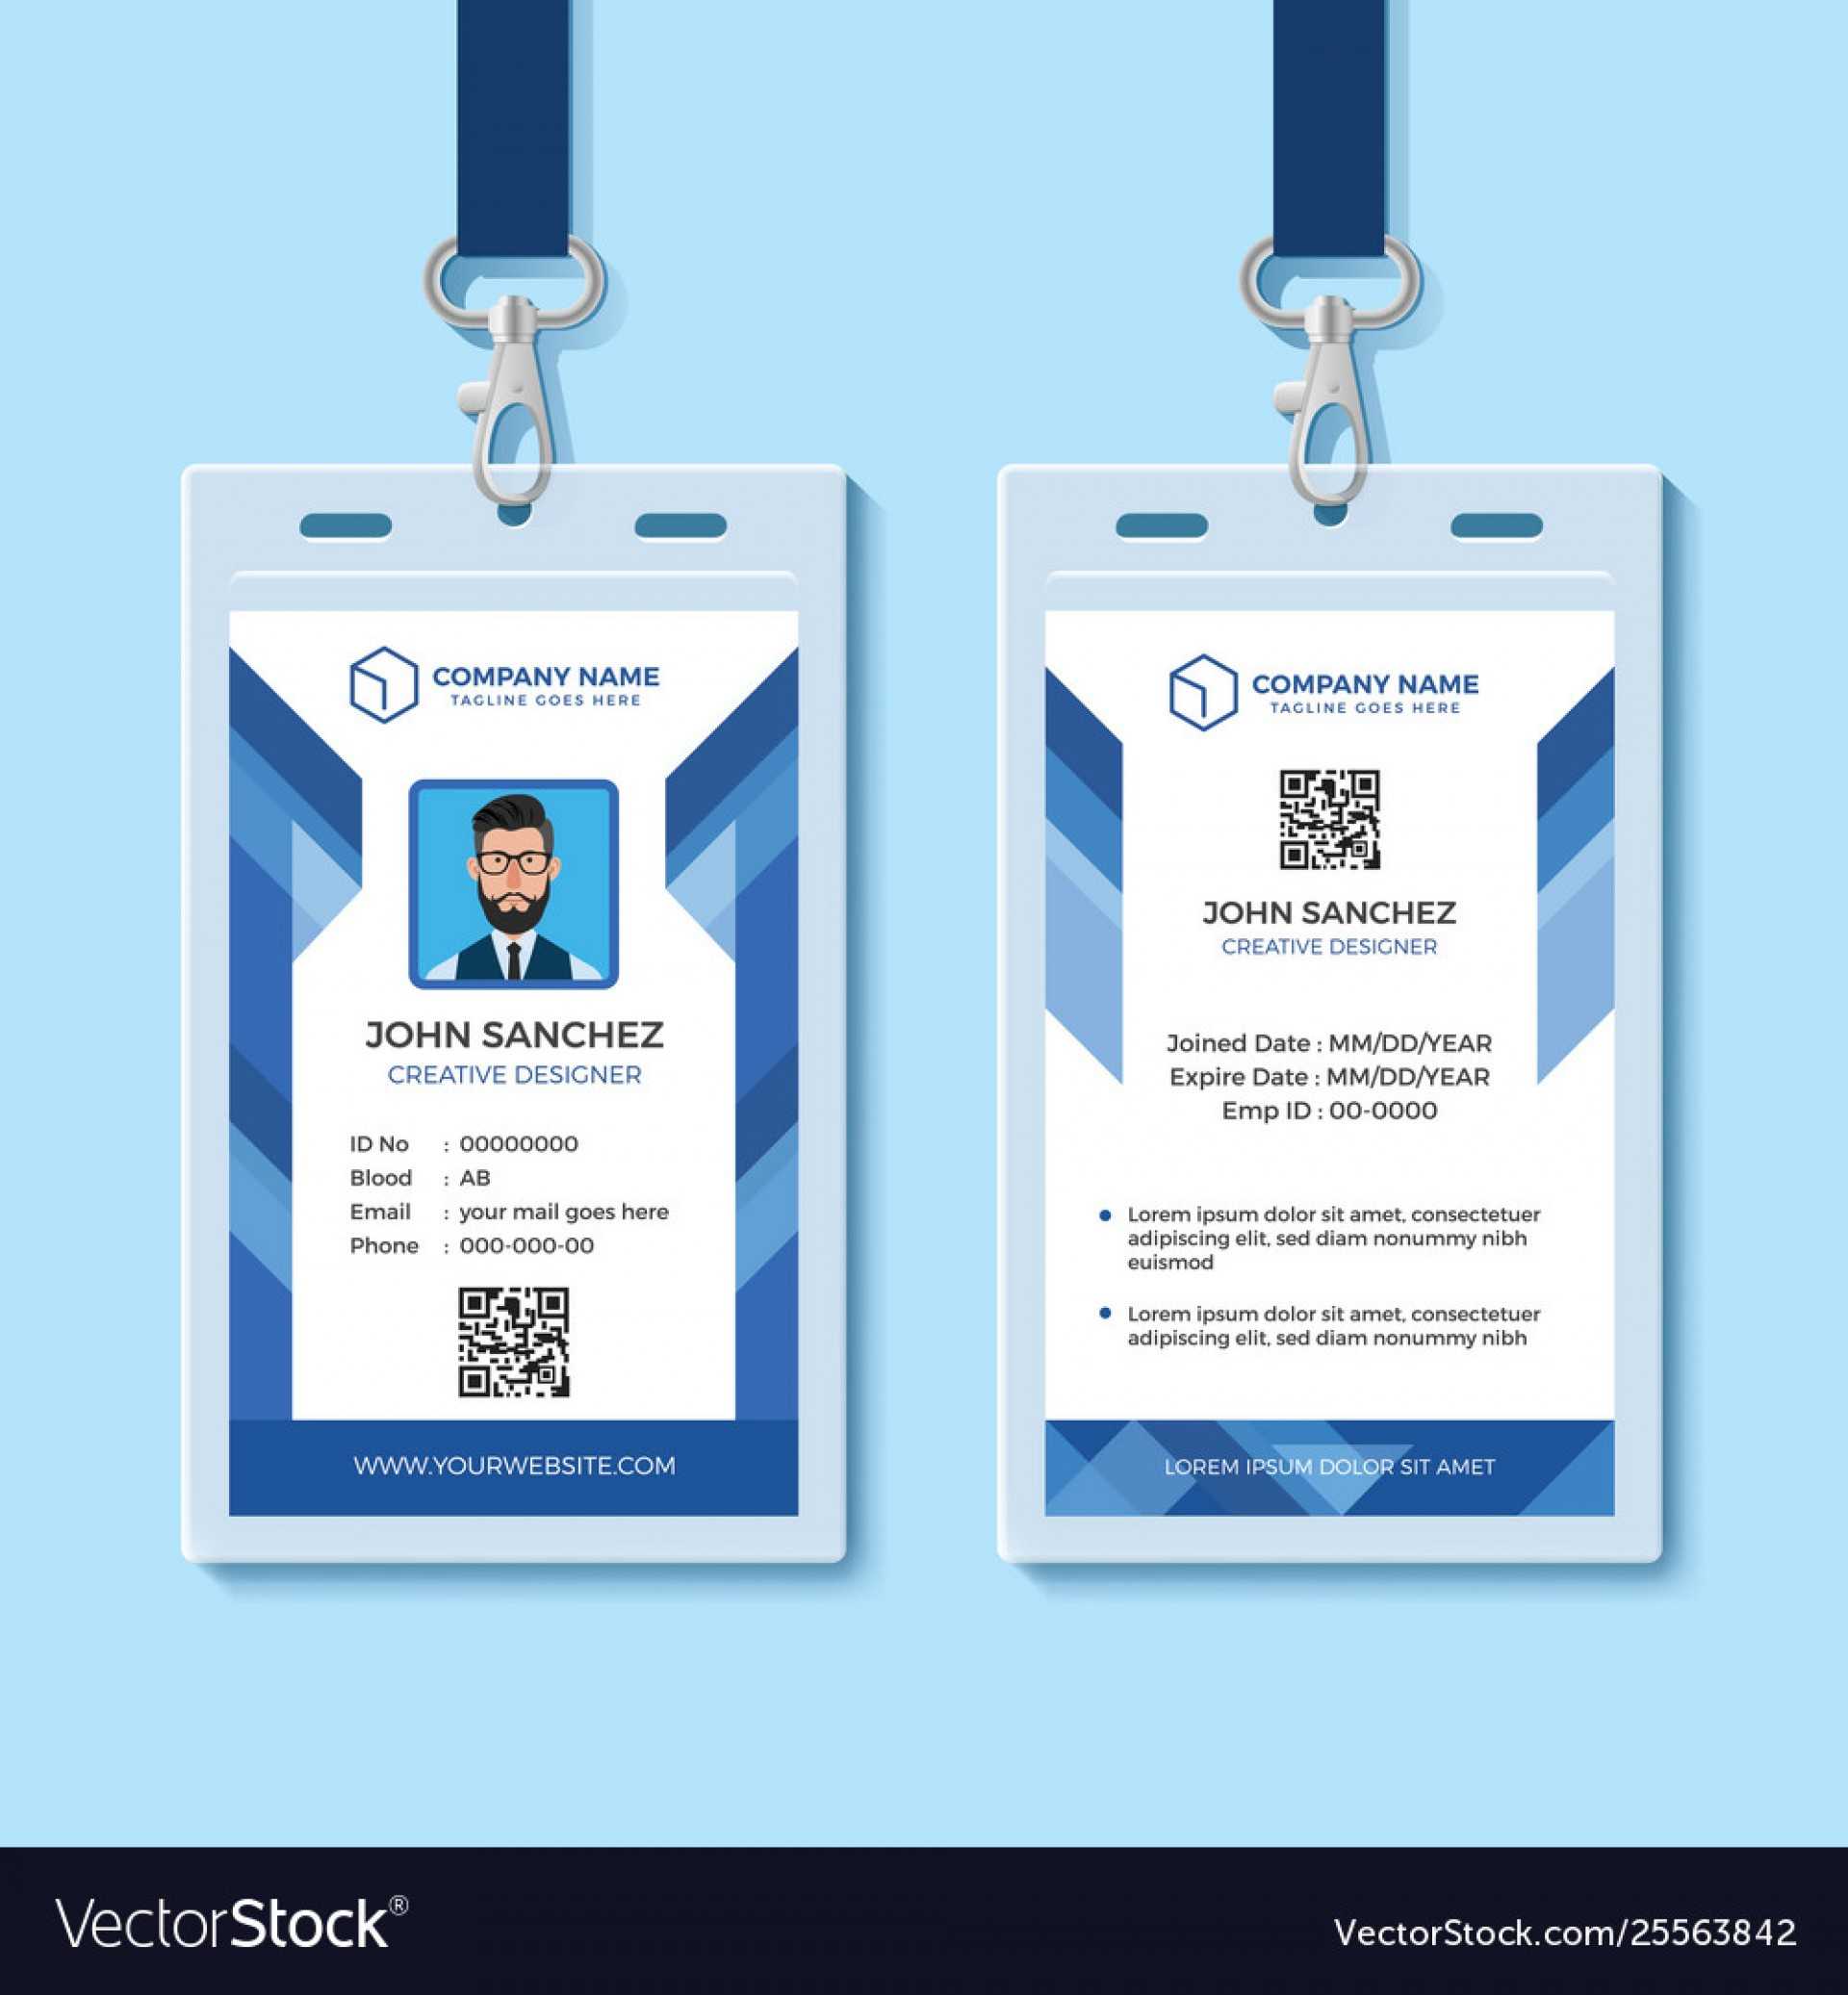 042 Template Ideas Employee Id Card Templates Blue Design For Id Card Template For Microsoft Word